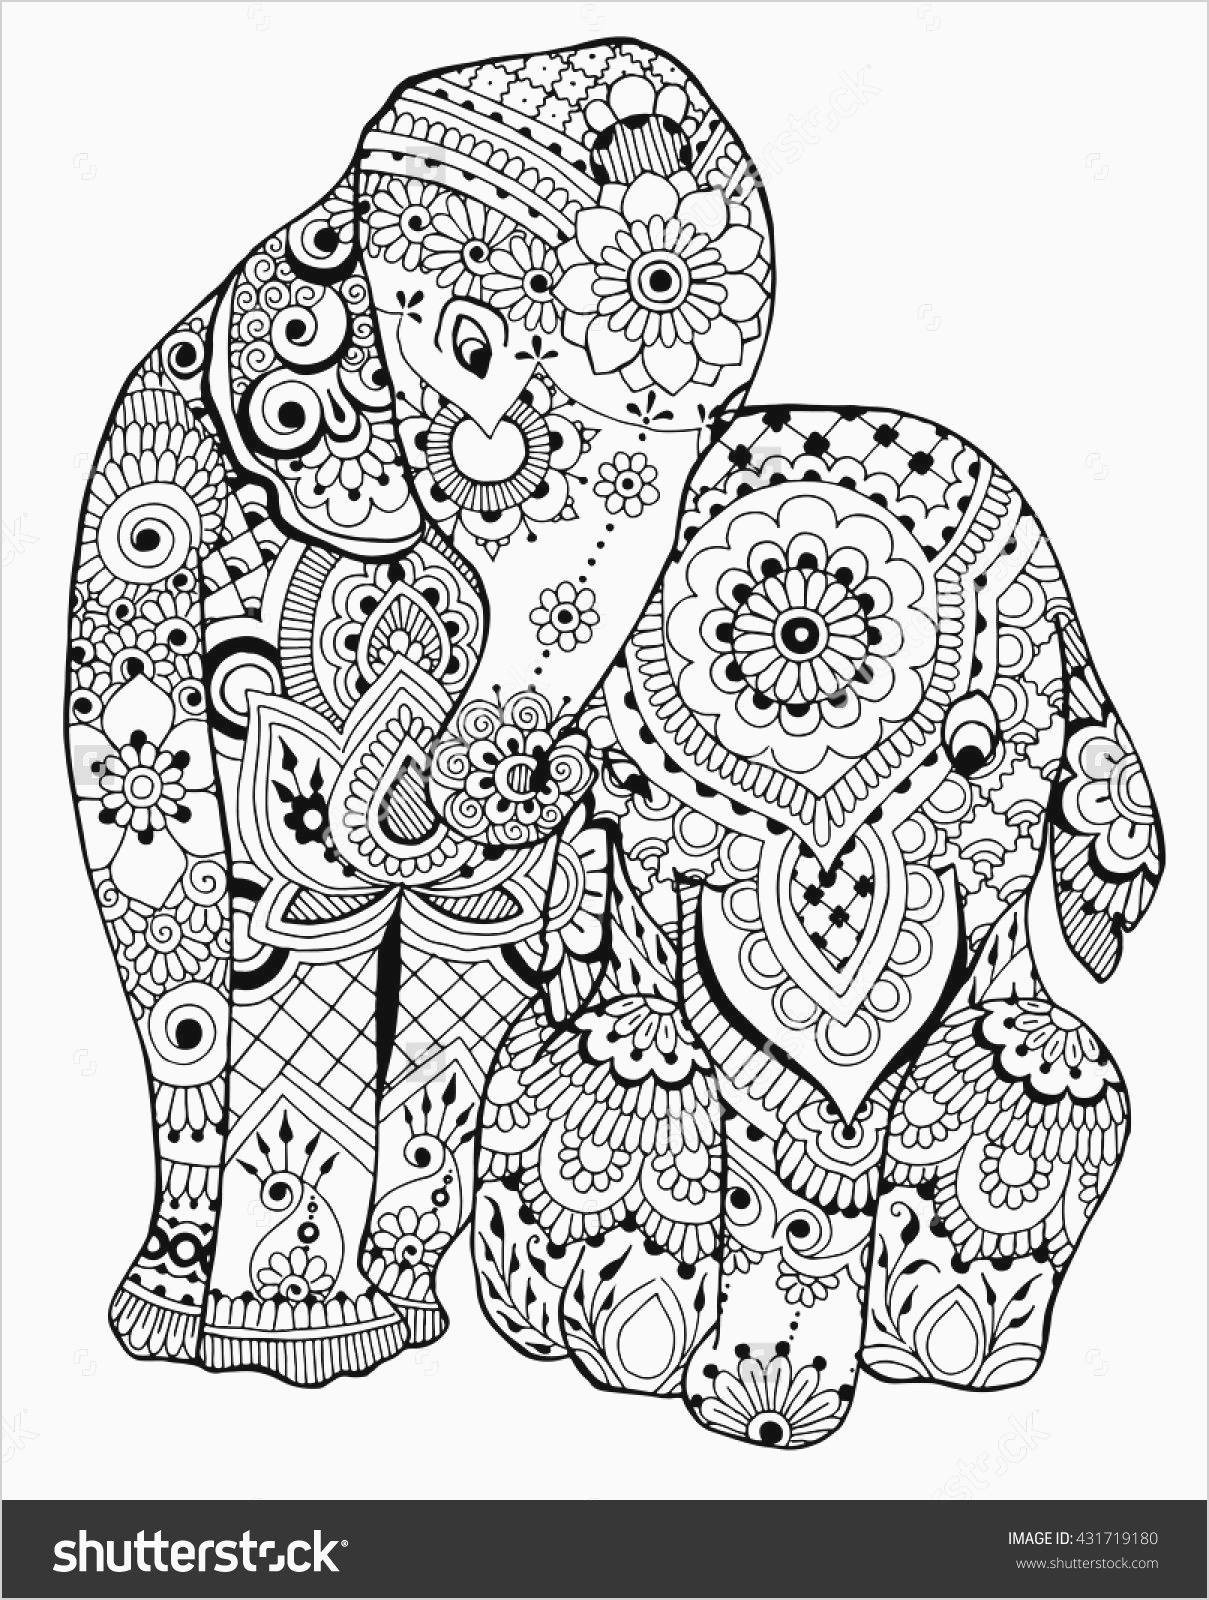 Drawing Elephant Eyes A Free Collection Of 49 Elephant Coloring Pages Download them